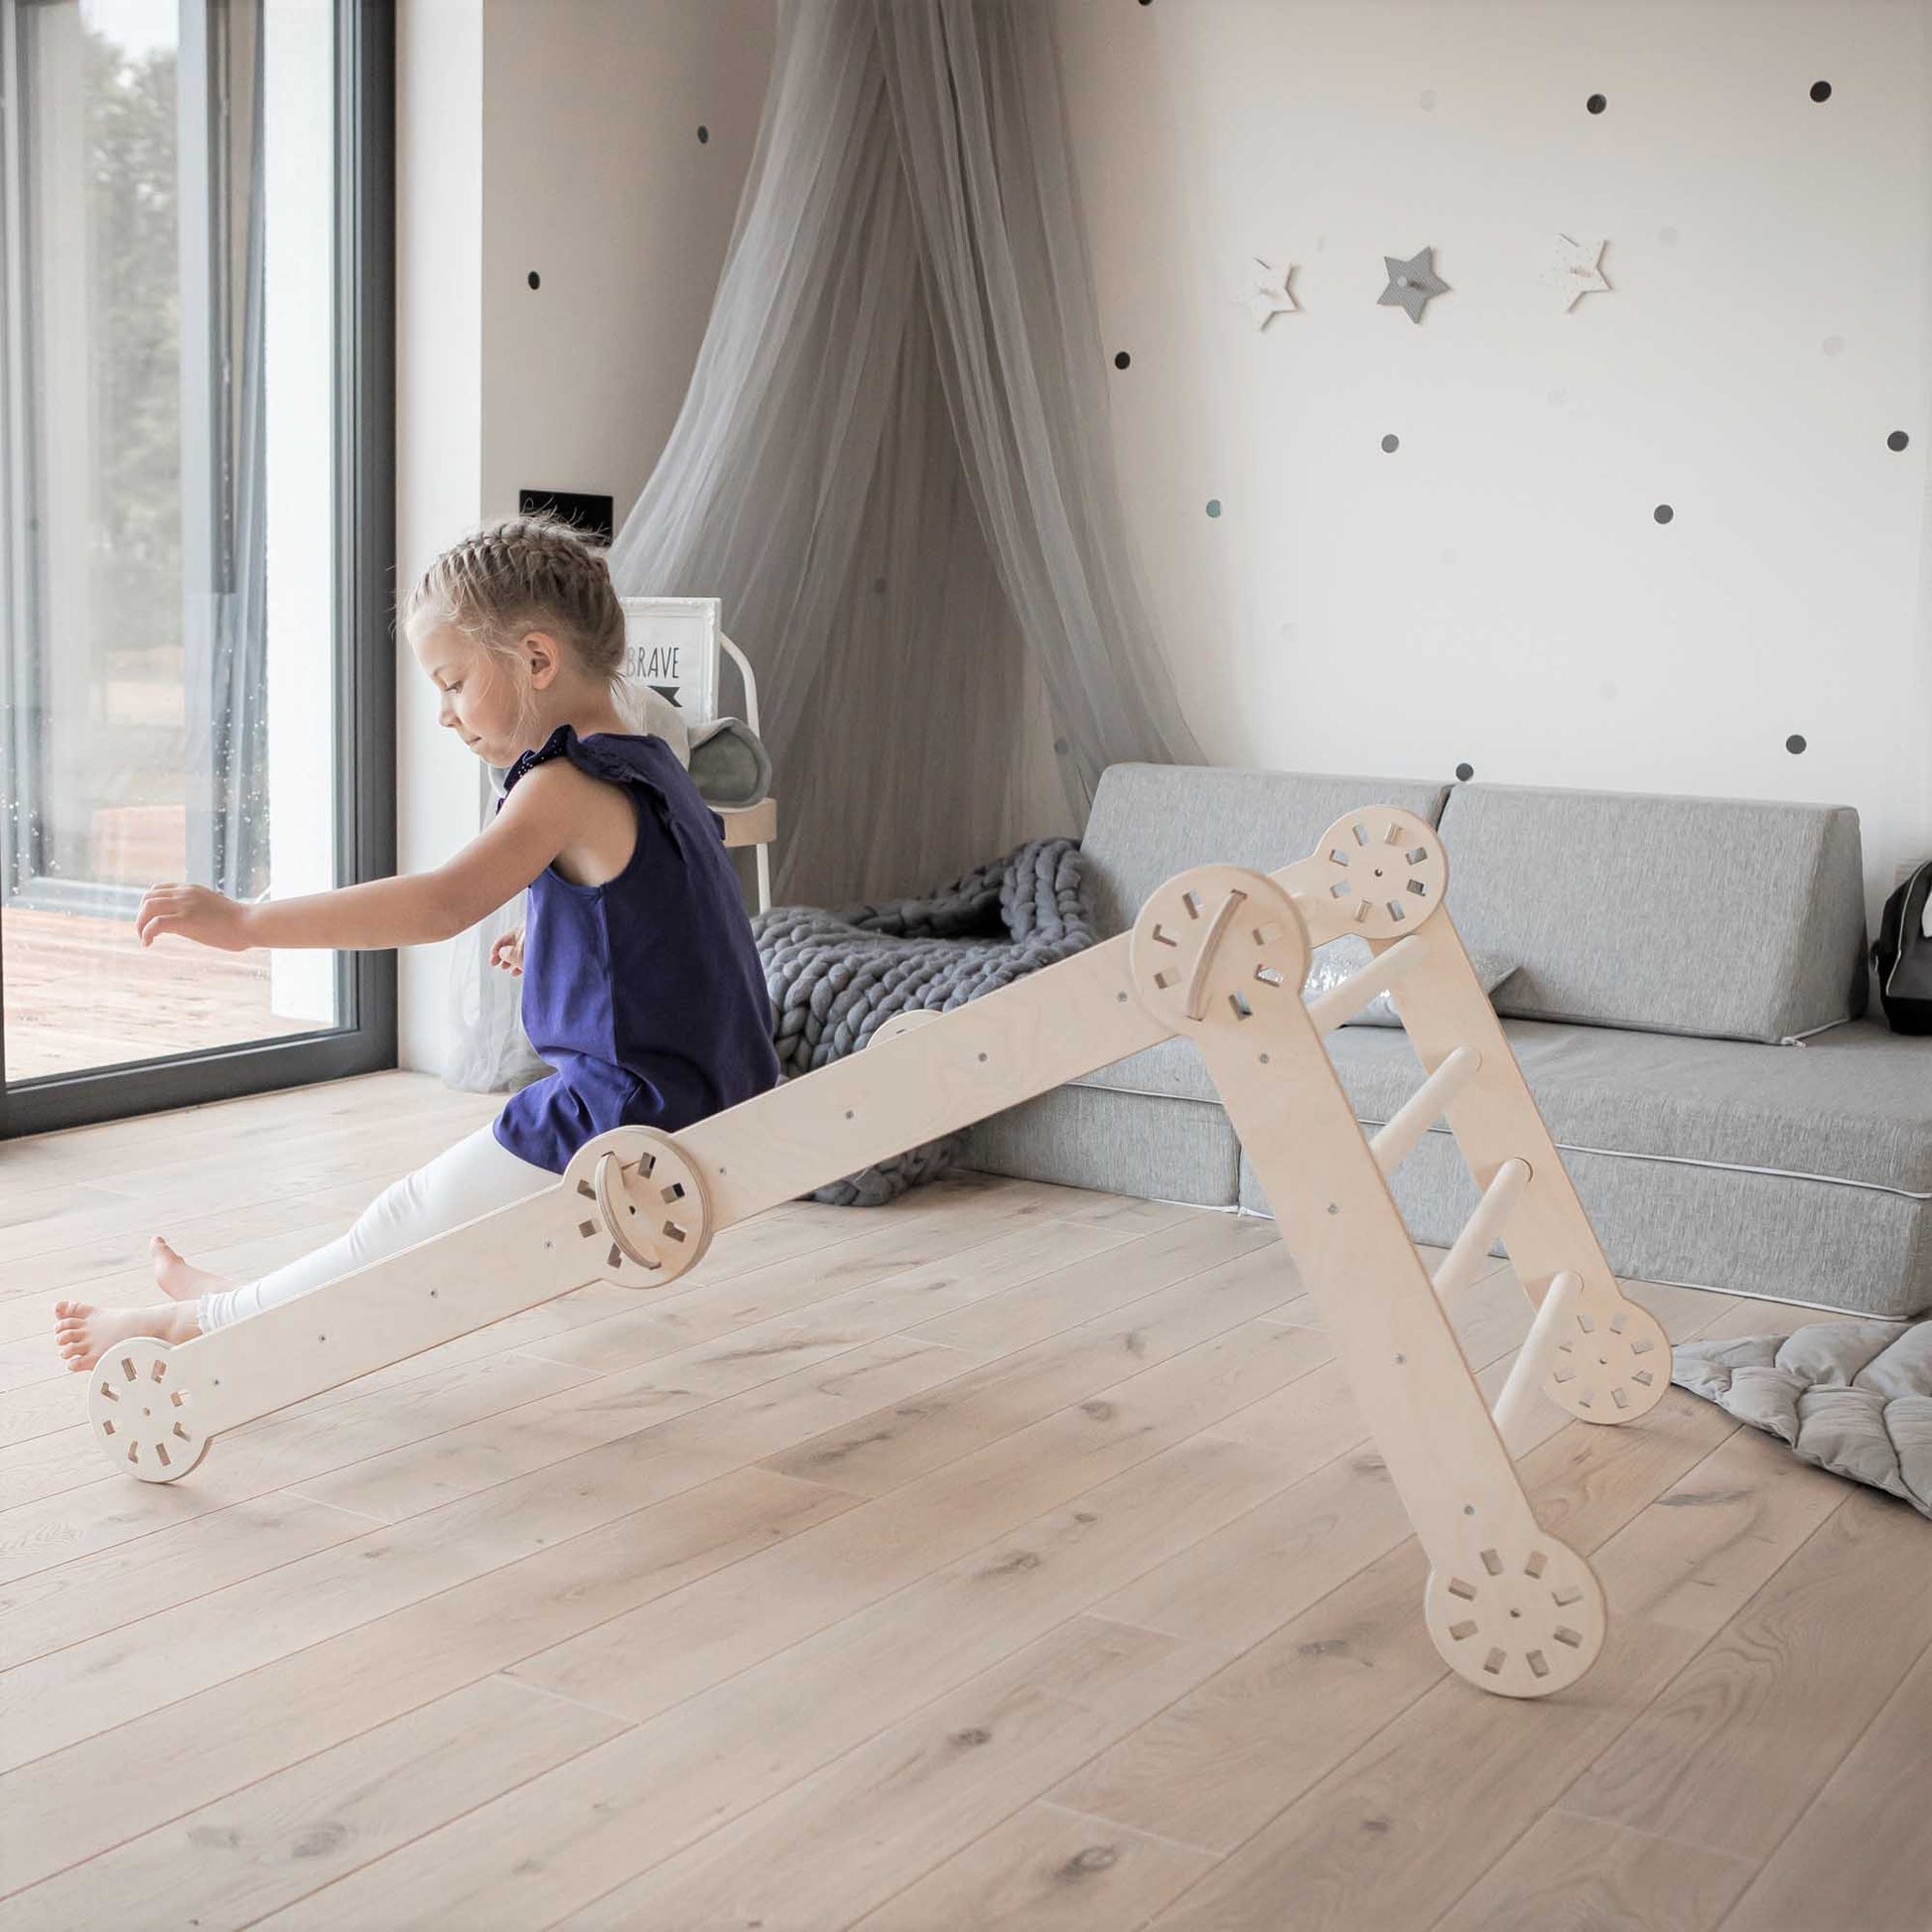 A child is playing with a wooden toy, a Transformable climbing gym, in a living room.